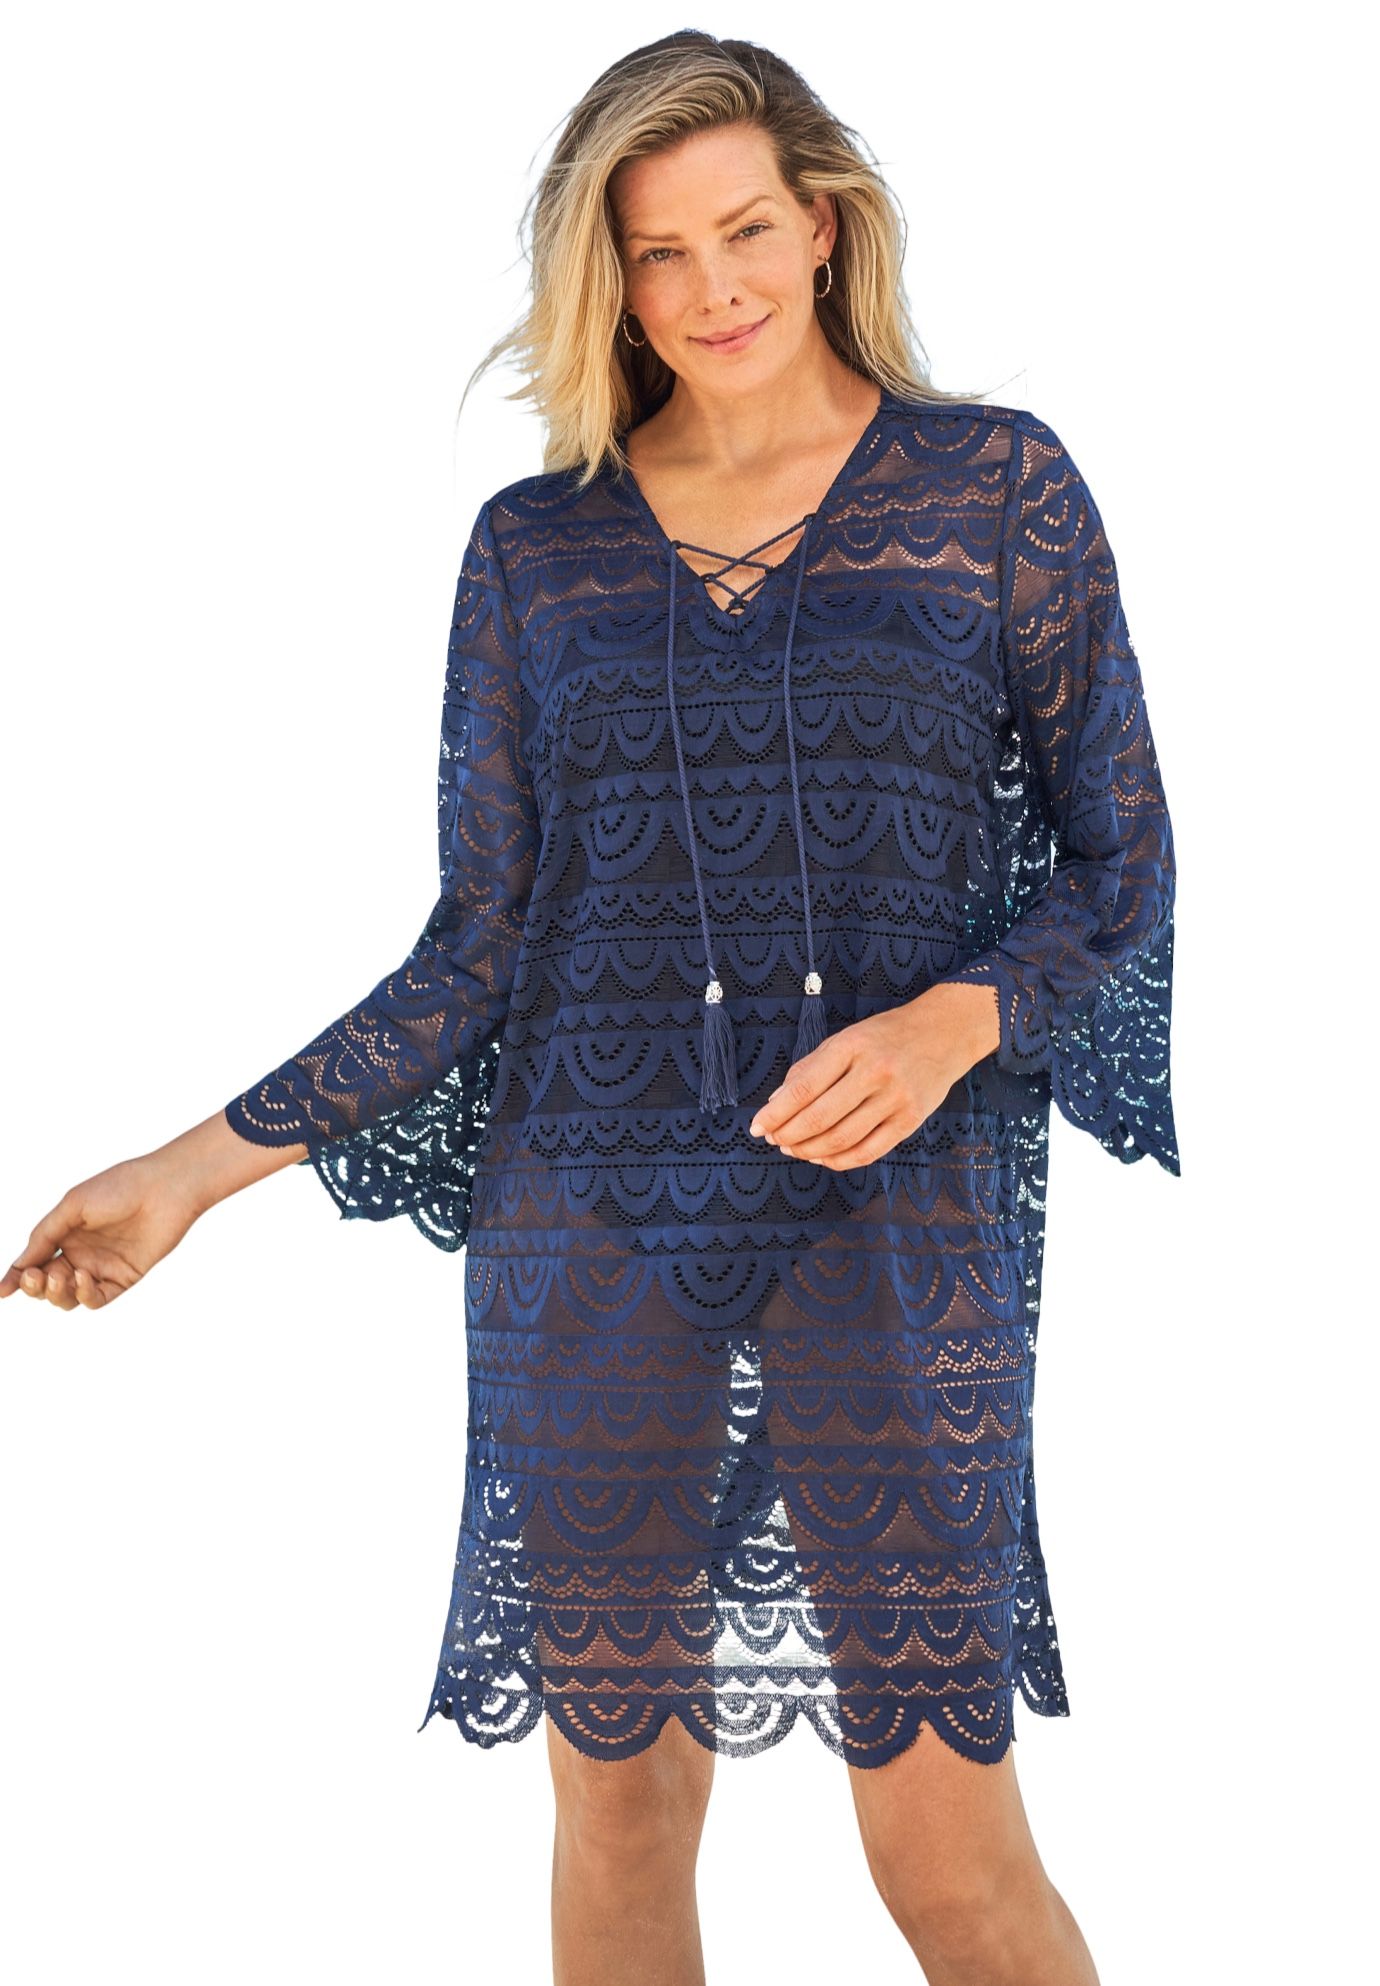 Womens Plus Size Swimwear Cover ups Lace Beach Coverups Swimsuit Bathing Suit Cover-ups 